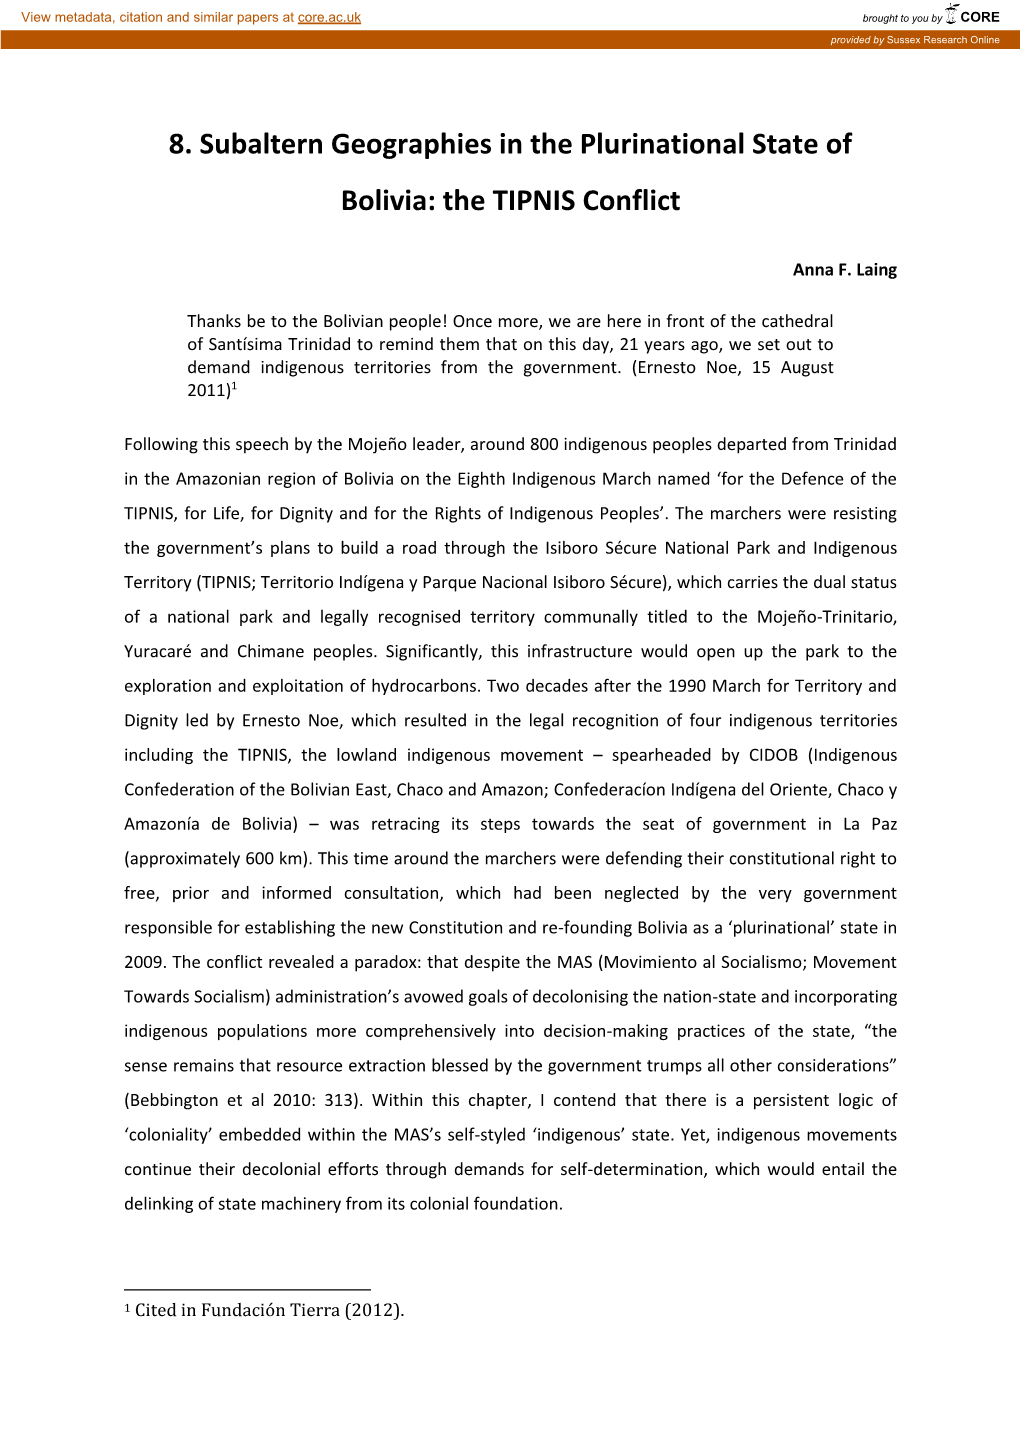 8. Subaltern Geographies in the Plurinational State of Bolivia: the TIPNIS Conflict